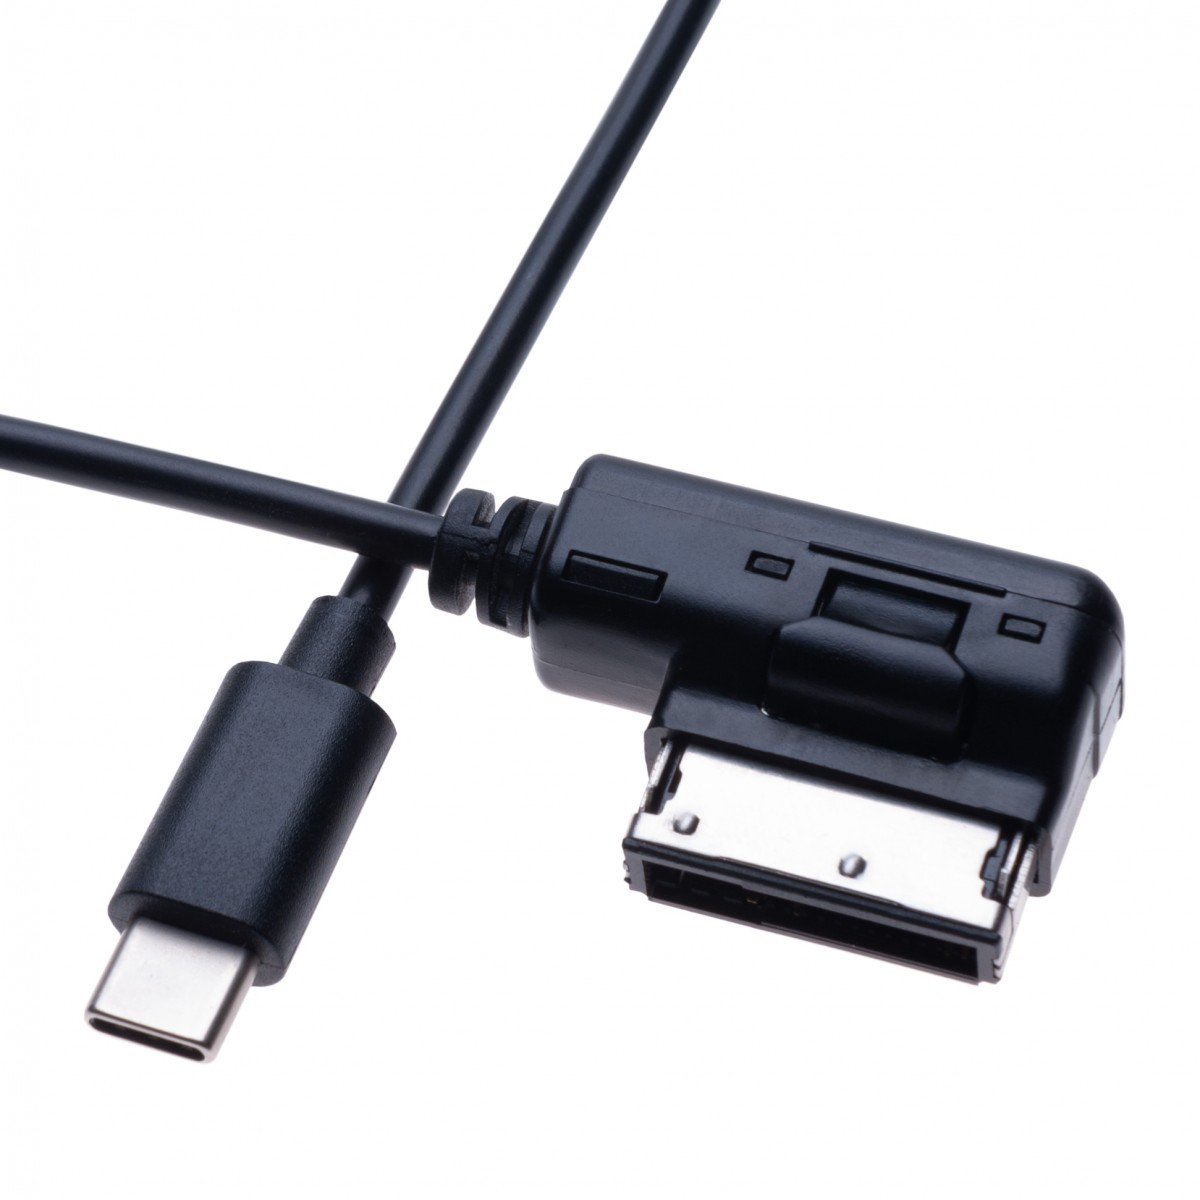 Music Interface AMI USB C Aux Cable for Audi A3 A4 A5 A6 A8 S4 S6 Volkswagen for Pixel 4 4XL 3 2 XL Galaxy S10 S10e S9 Note 9 HTC U12+/U11 Moto Z2 